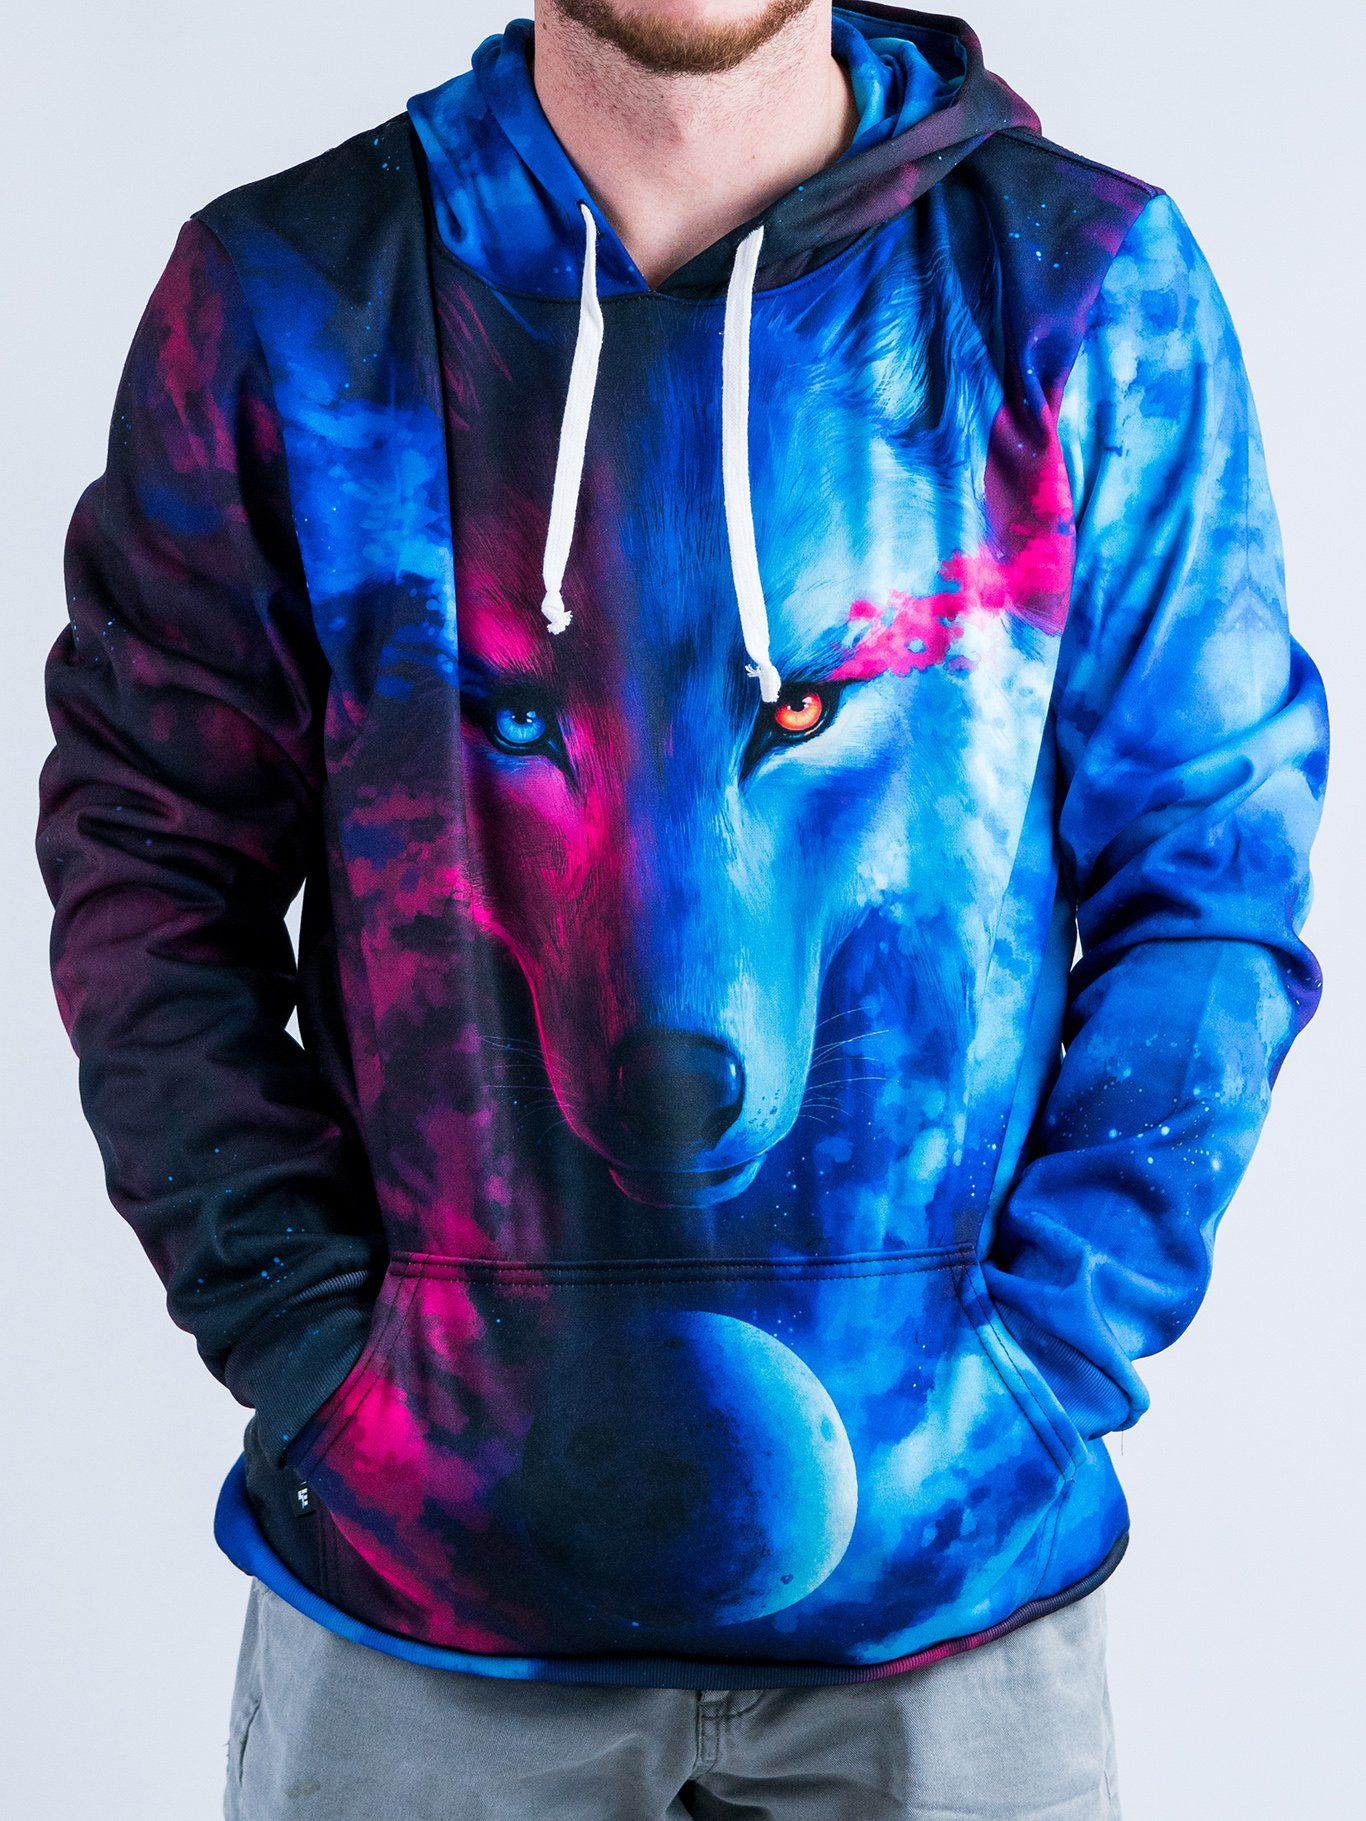 hoodies with wolf designs